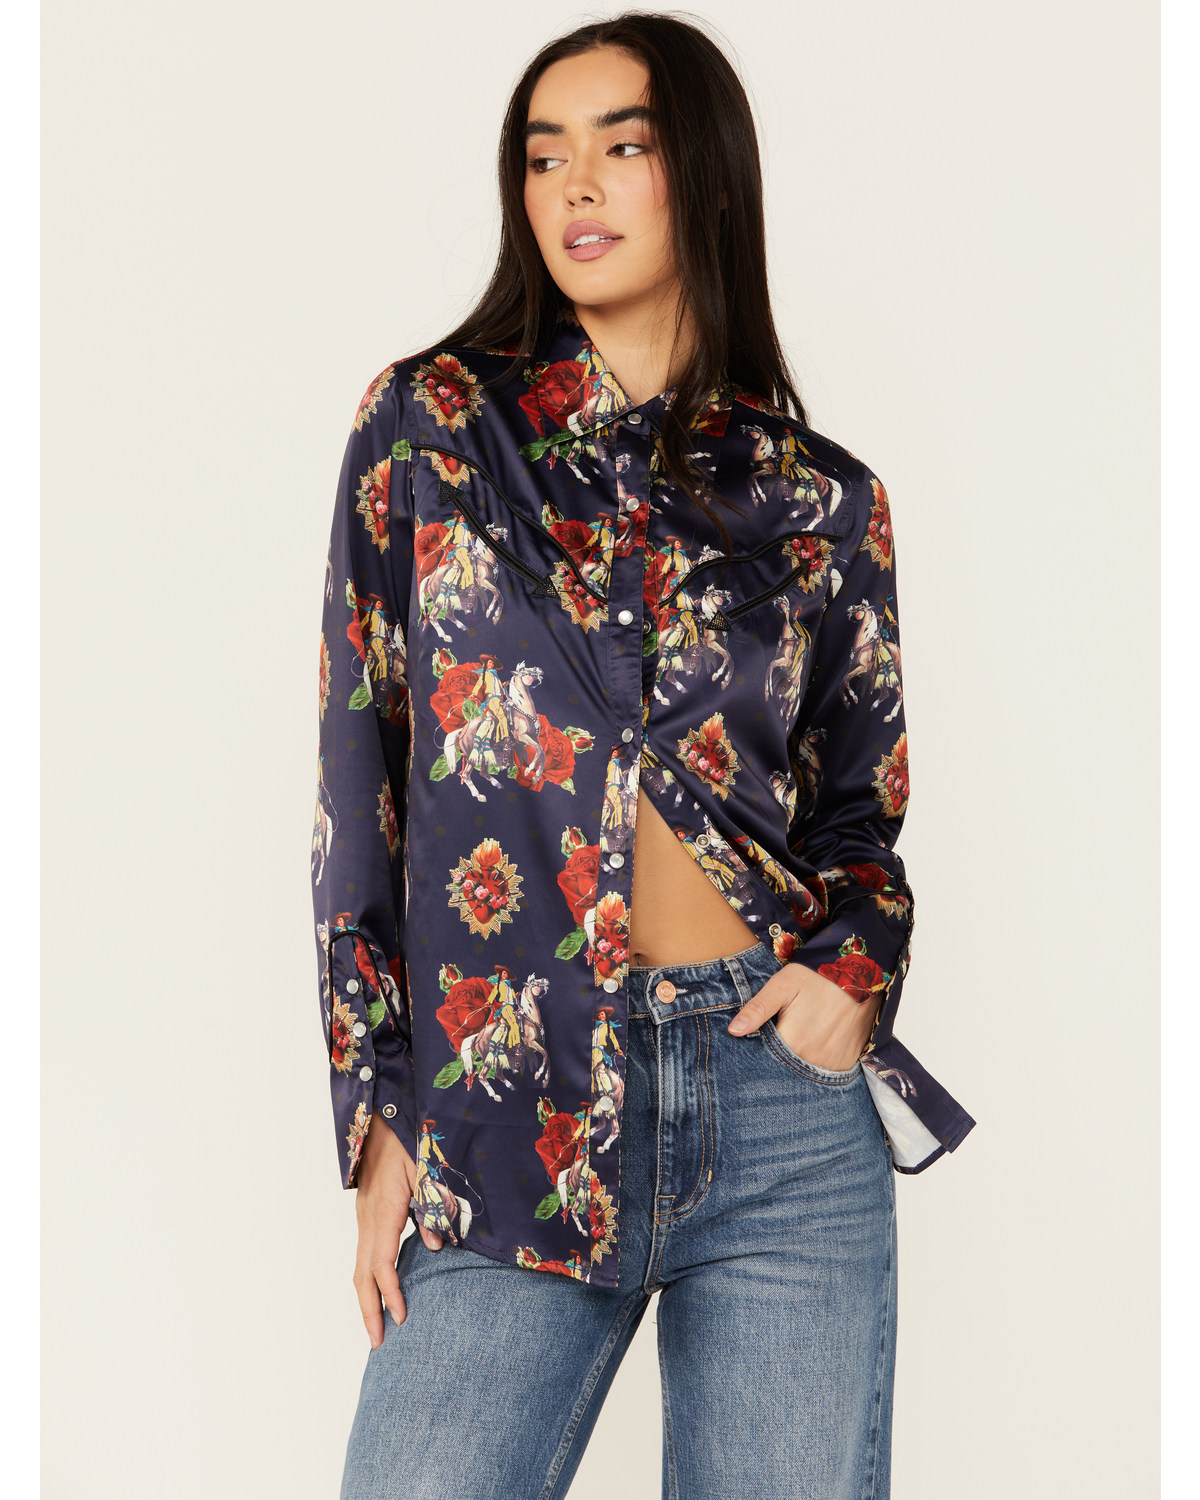 Rodeo Quincy Women's Floral Horse Print Long Sleeve Pearl Snap Western Shirt